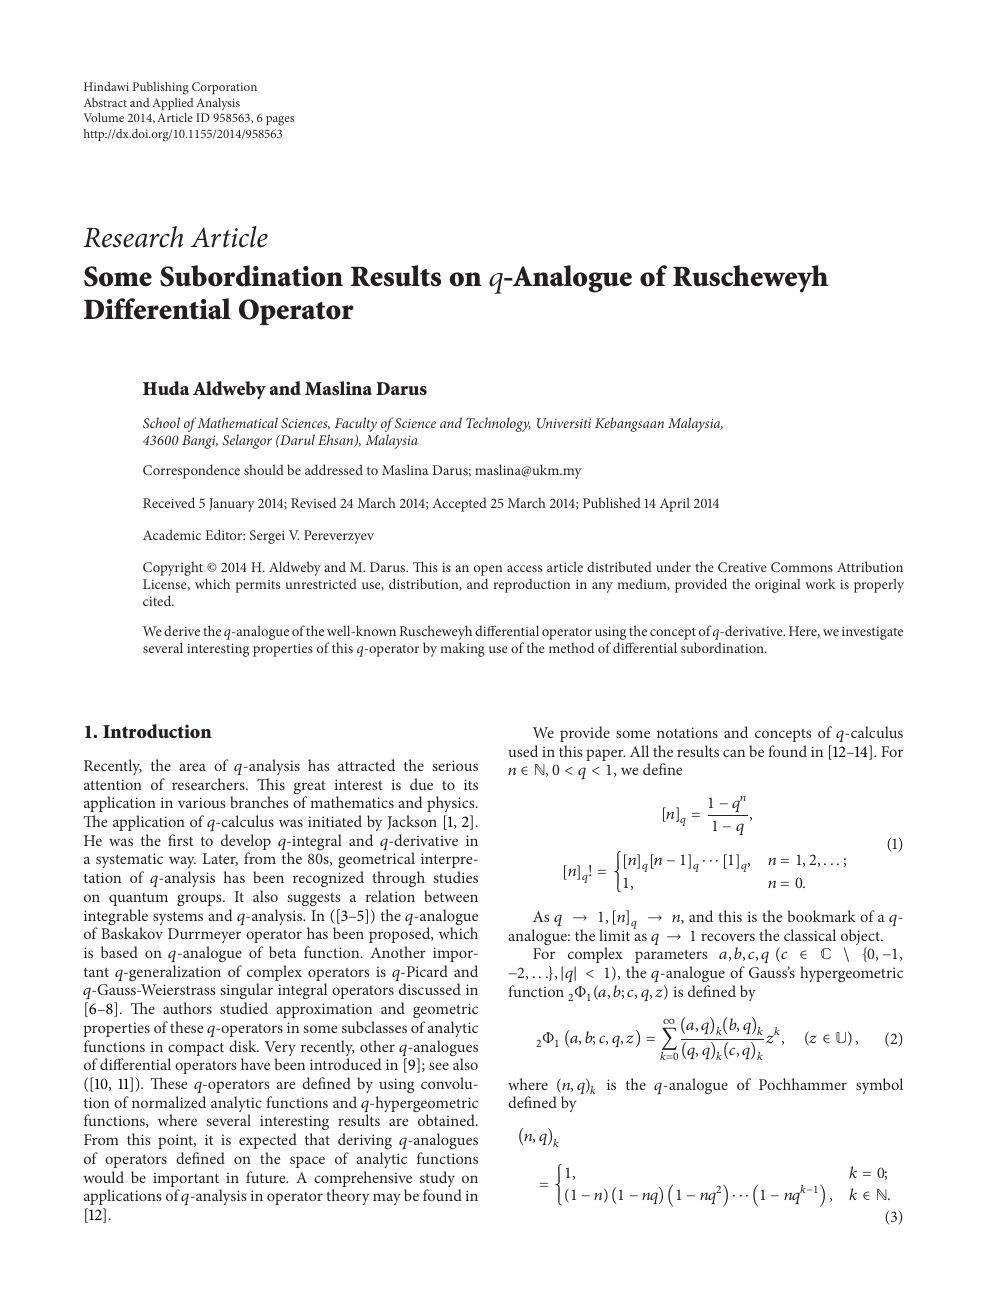 Some Subordination Results On Analogue Of Ruscheweyh Differential Operator Topic Of Research Paper In Mathematics Download Scholarly Article Pdf And Read For Free On Cyberleninka Open Science Hub